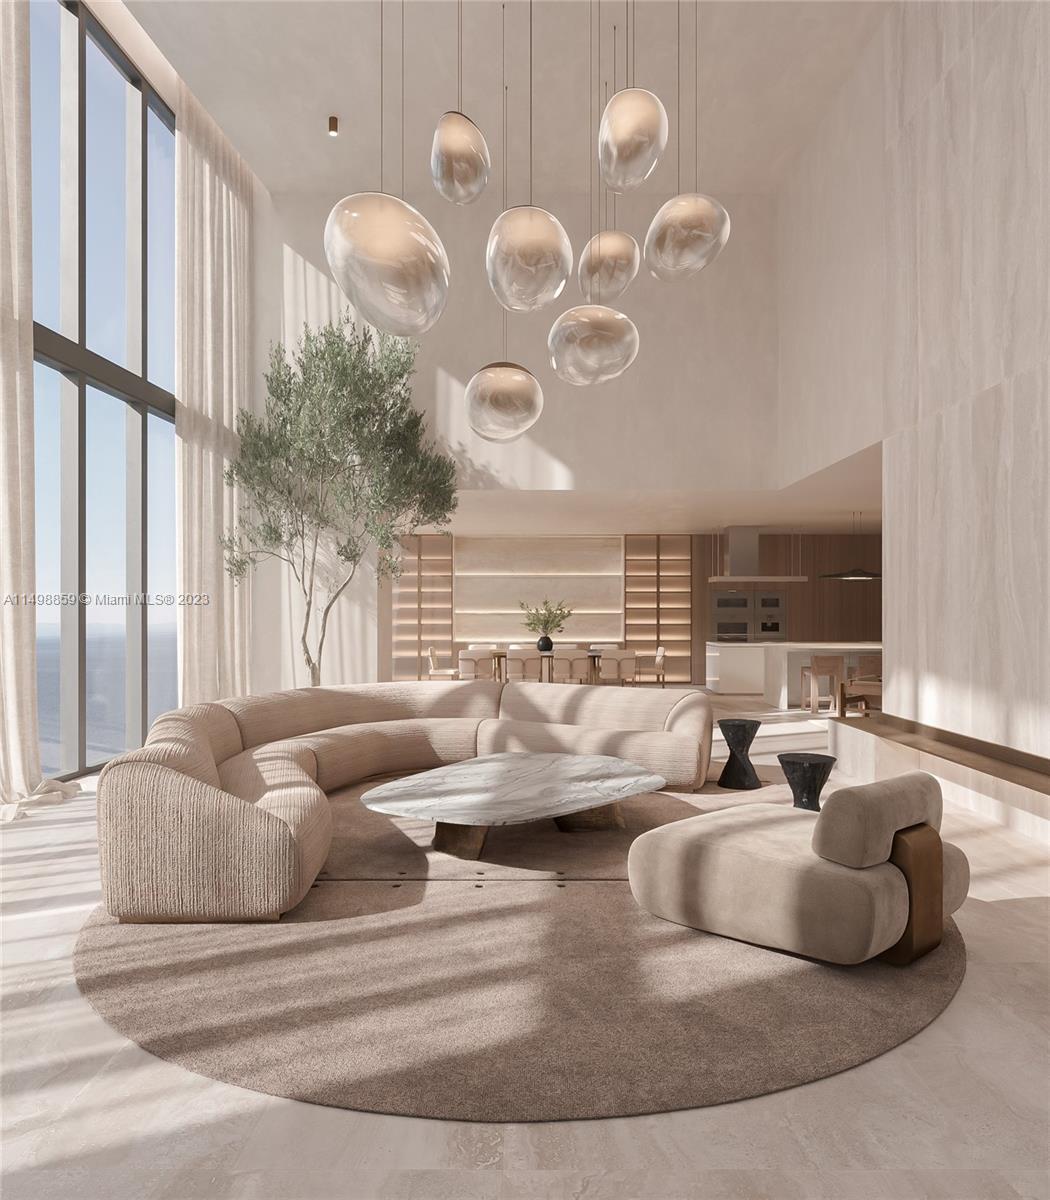 FULLY FURNISHED and PROFFESSIONAL DESIGENED LIMITED COLLECTION-SKY VILLA. Total SQ Footage is 11,035, including 4,340 SQ feet of terraces, Stunning DUPLEX Residence “D” North flowthrough residence w direct Ocean & Intracoastal views. 20' CEILINGS in LIVING RM/BALCONY w 10-11' ceilings thru-out. Imported Snaidero Italian cabinetry & stone countertops, top-of-the line Gaggneau appl, 11’ deep oceanfront terrace w summer kitchen+PRIVATE POOL & HYDROTHERAPY SPA. Spacious walk-in closets.

Turnberry Ocean Club Residences features 70,000 SF of luxury amenities & unrivaled, world-class service, including the 3-story private signature Sky Club w sunrise/sunset pools, priv dining, health/wellness spa & entertainment.